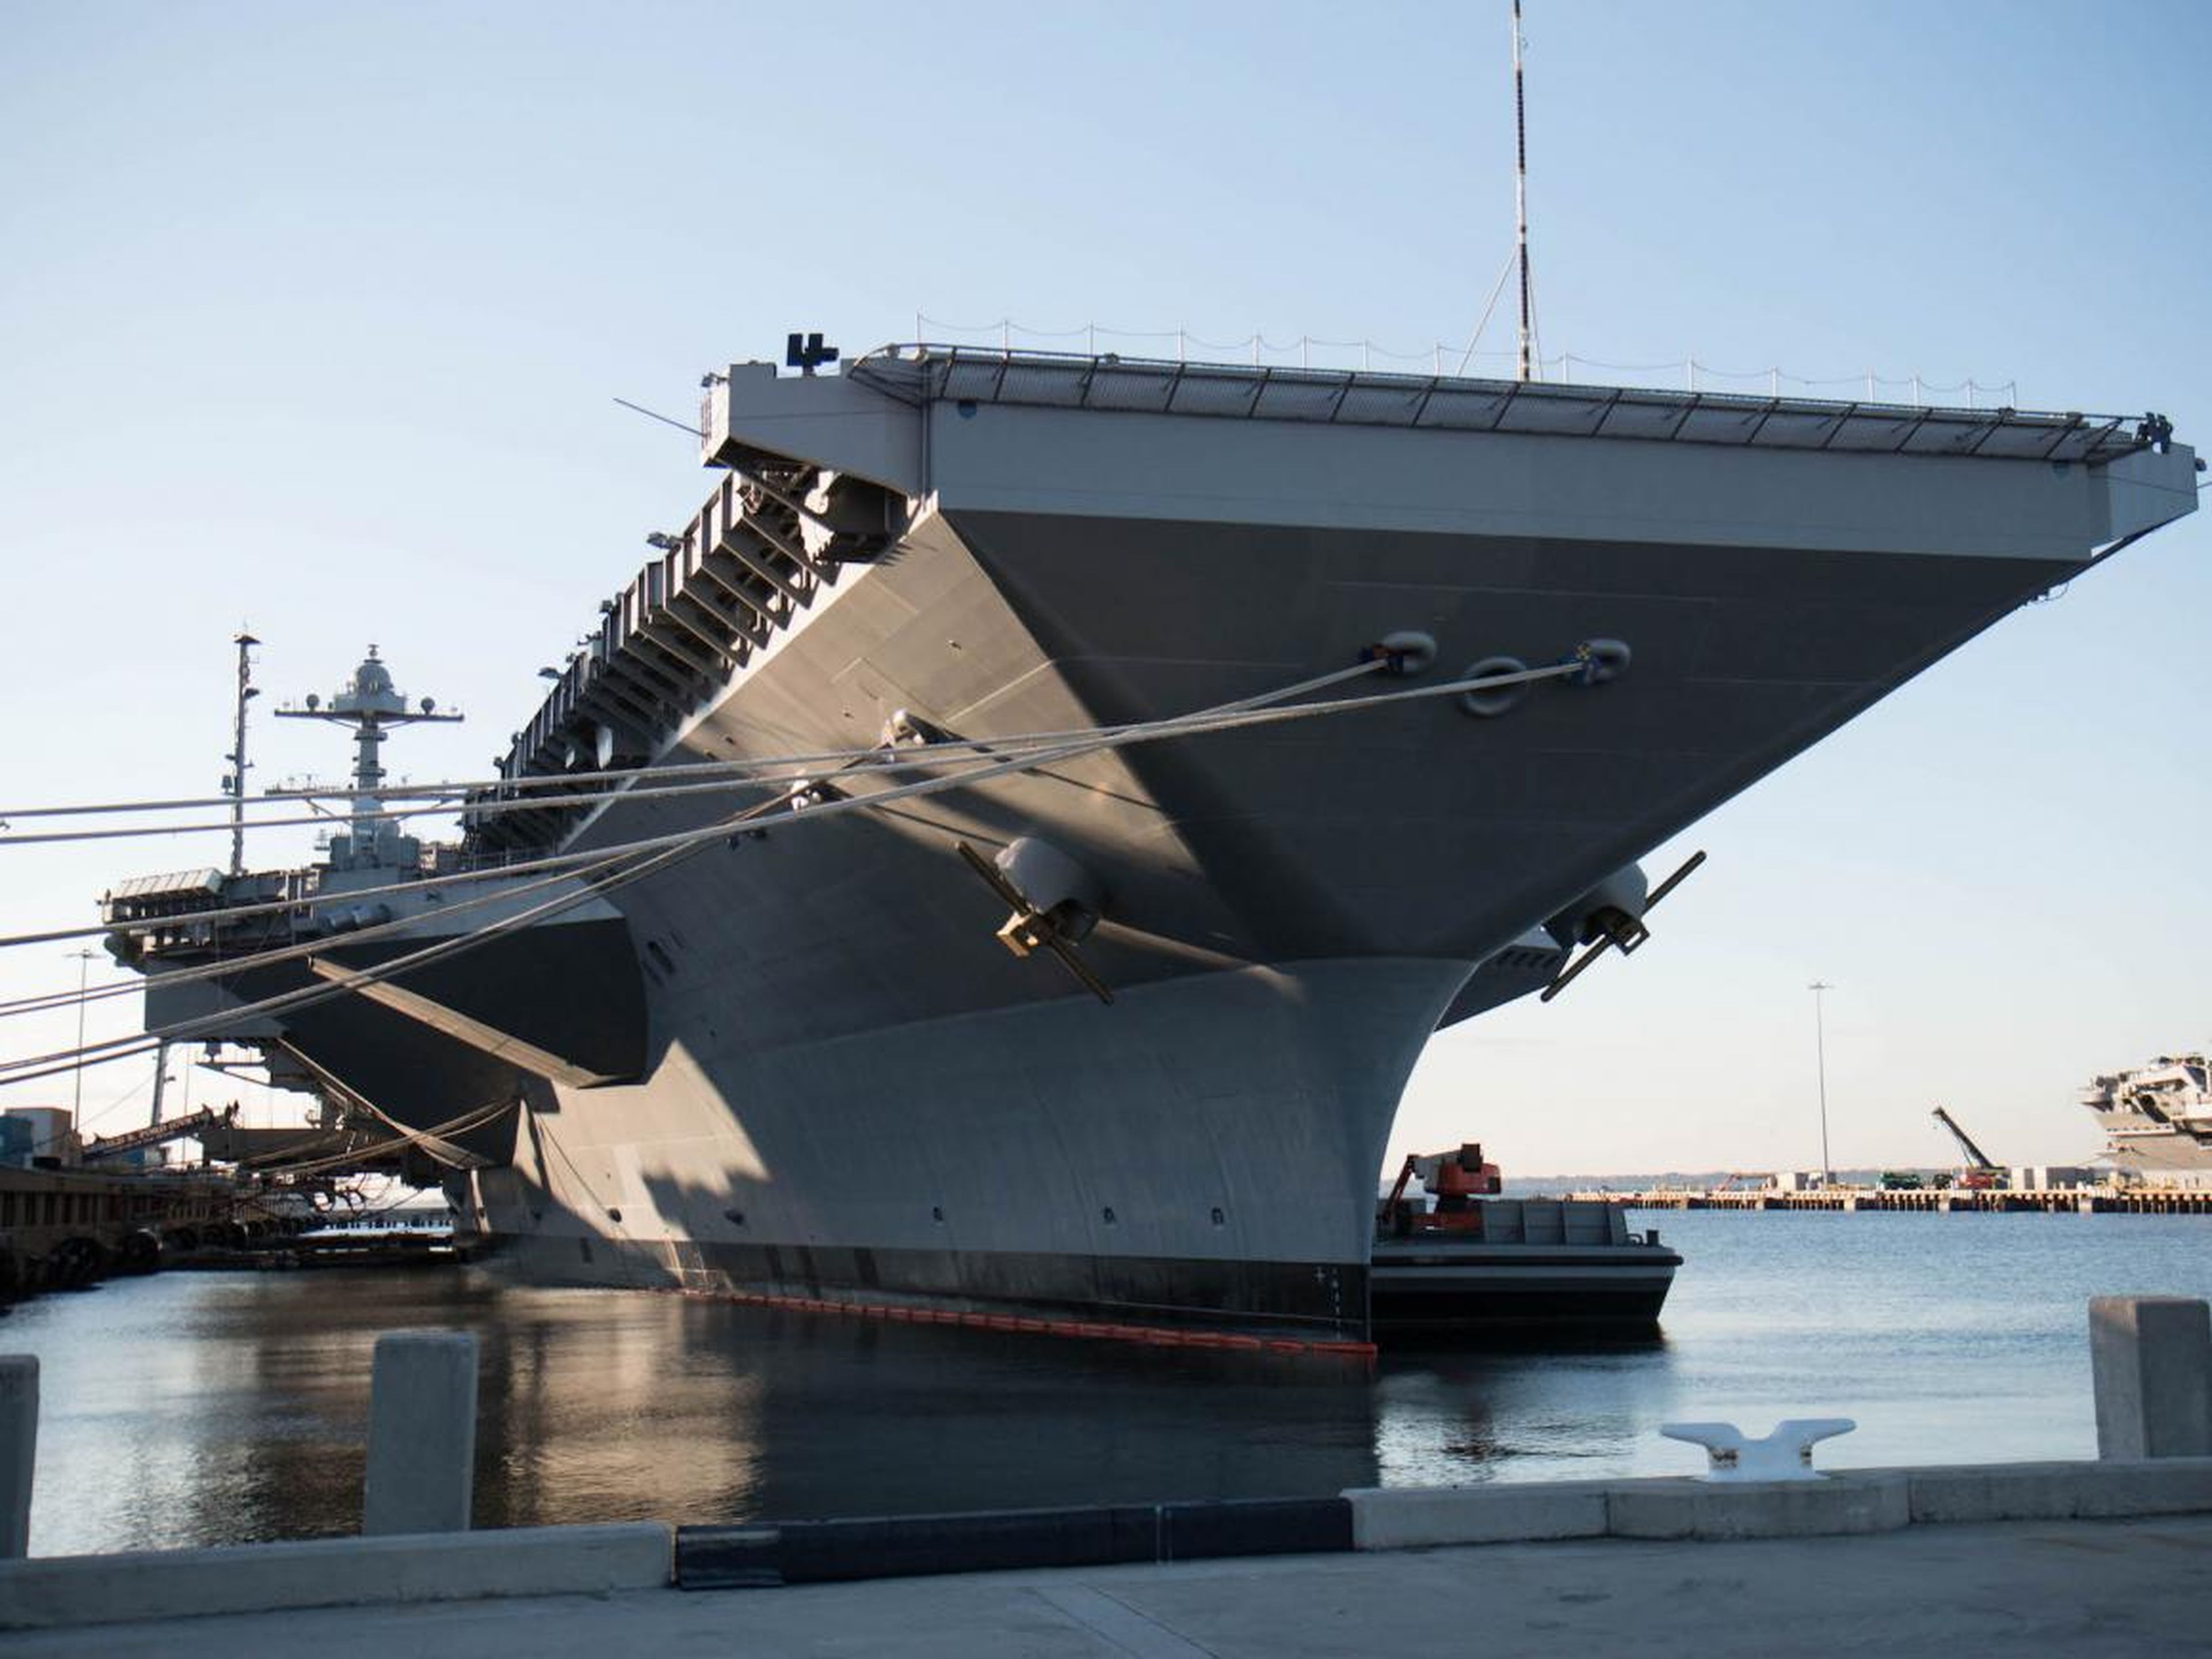 The USS Gerald Ford aircraft carrier.